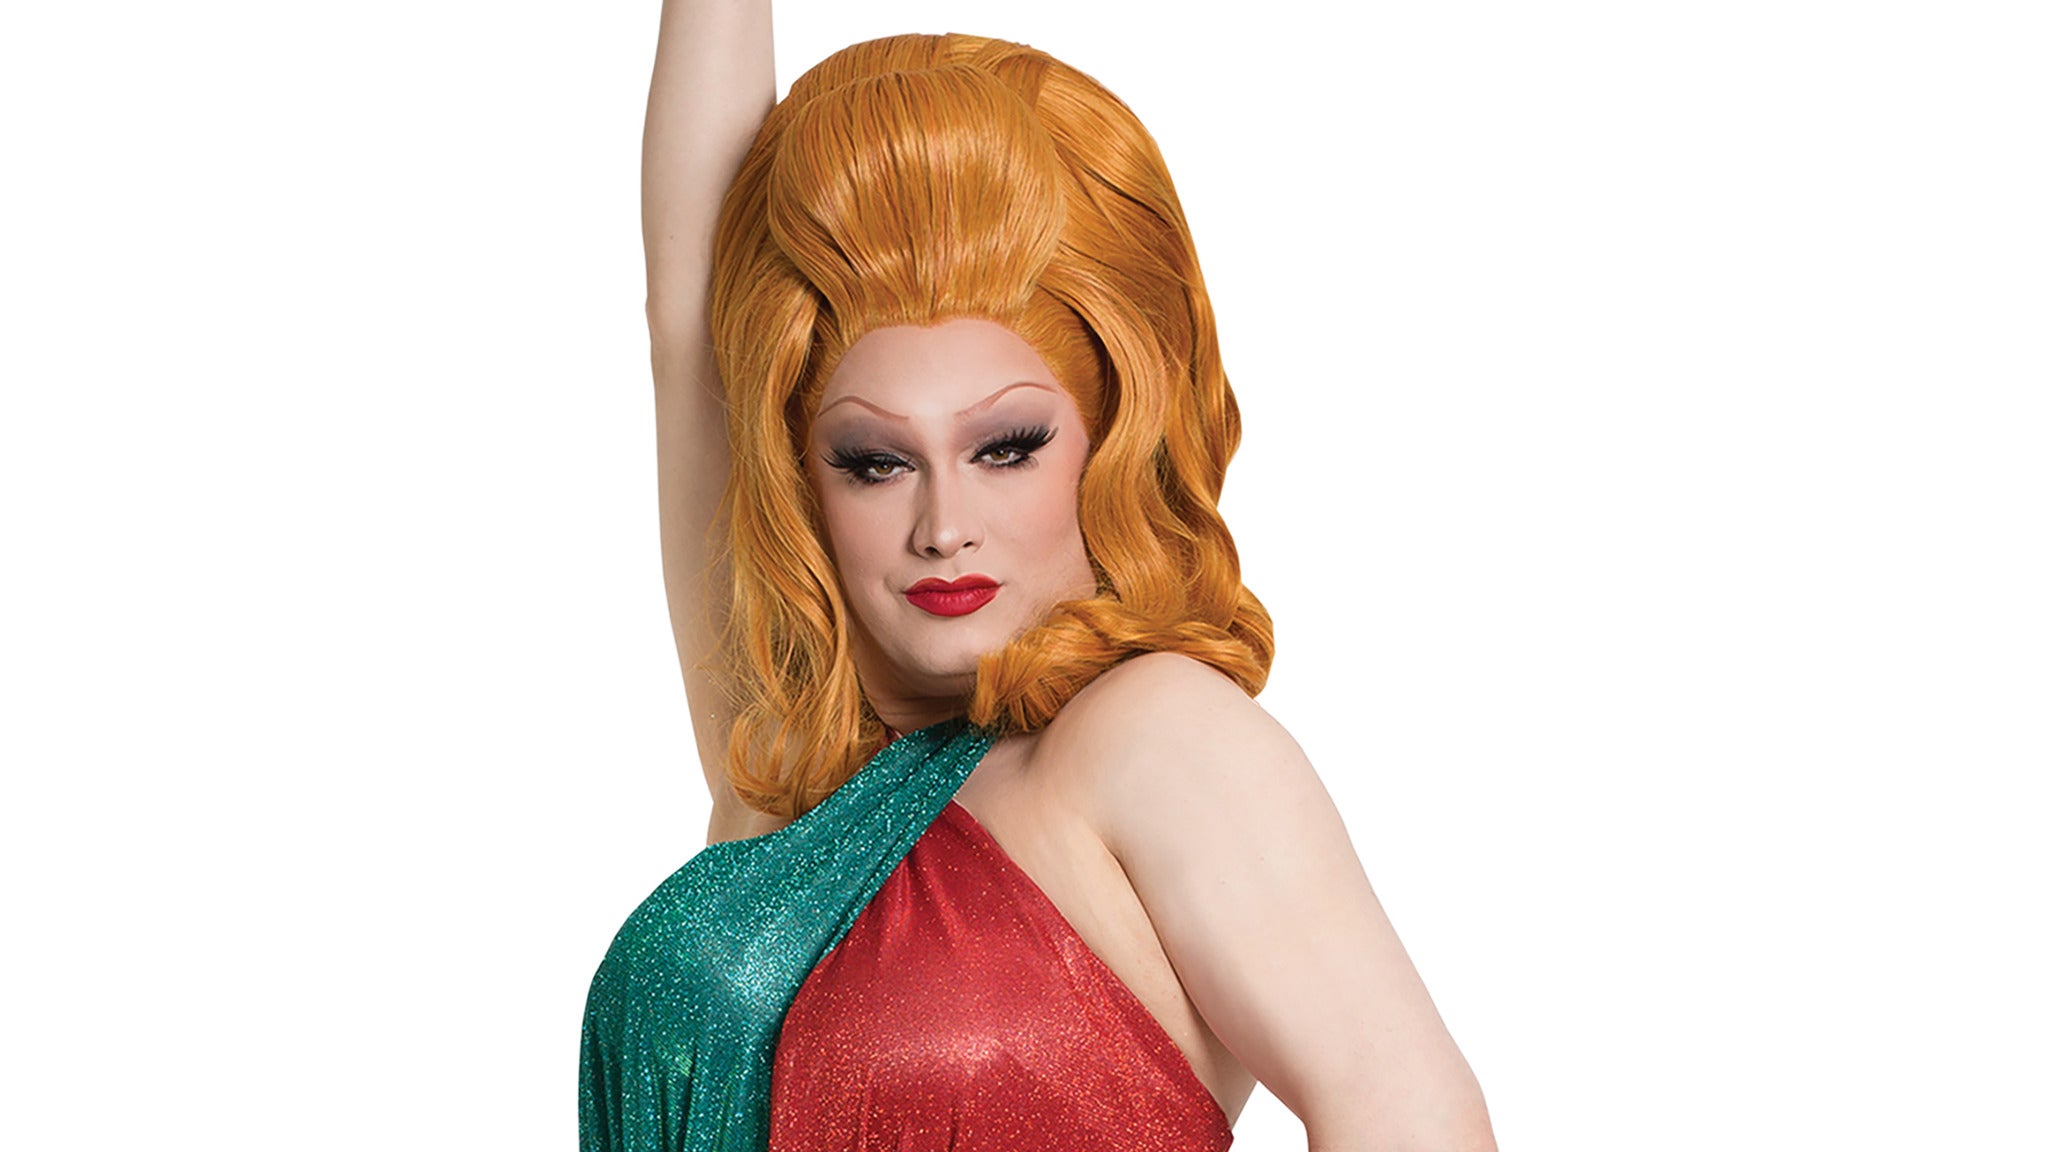 The Jinkx & DeLa Holiday Show Live in Chicago promo photo for Live Nation presale offer code